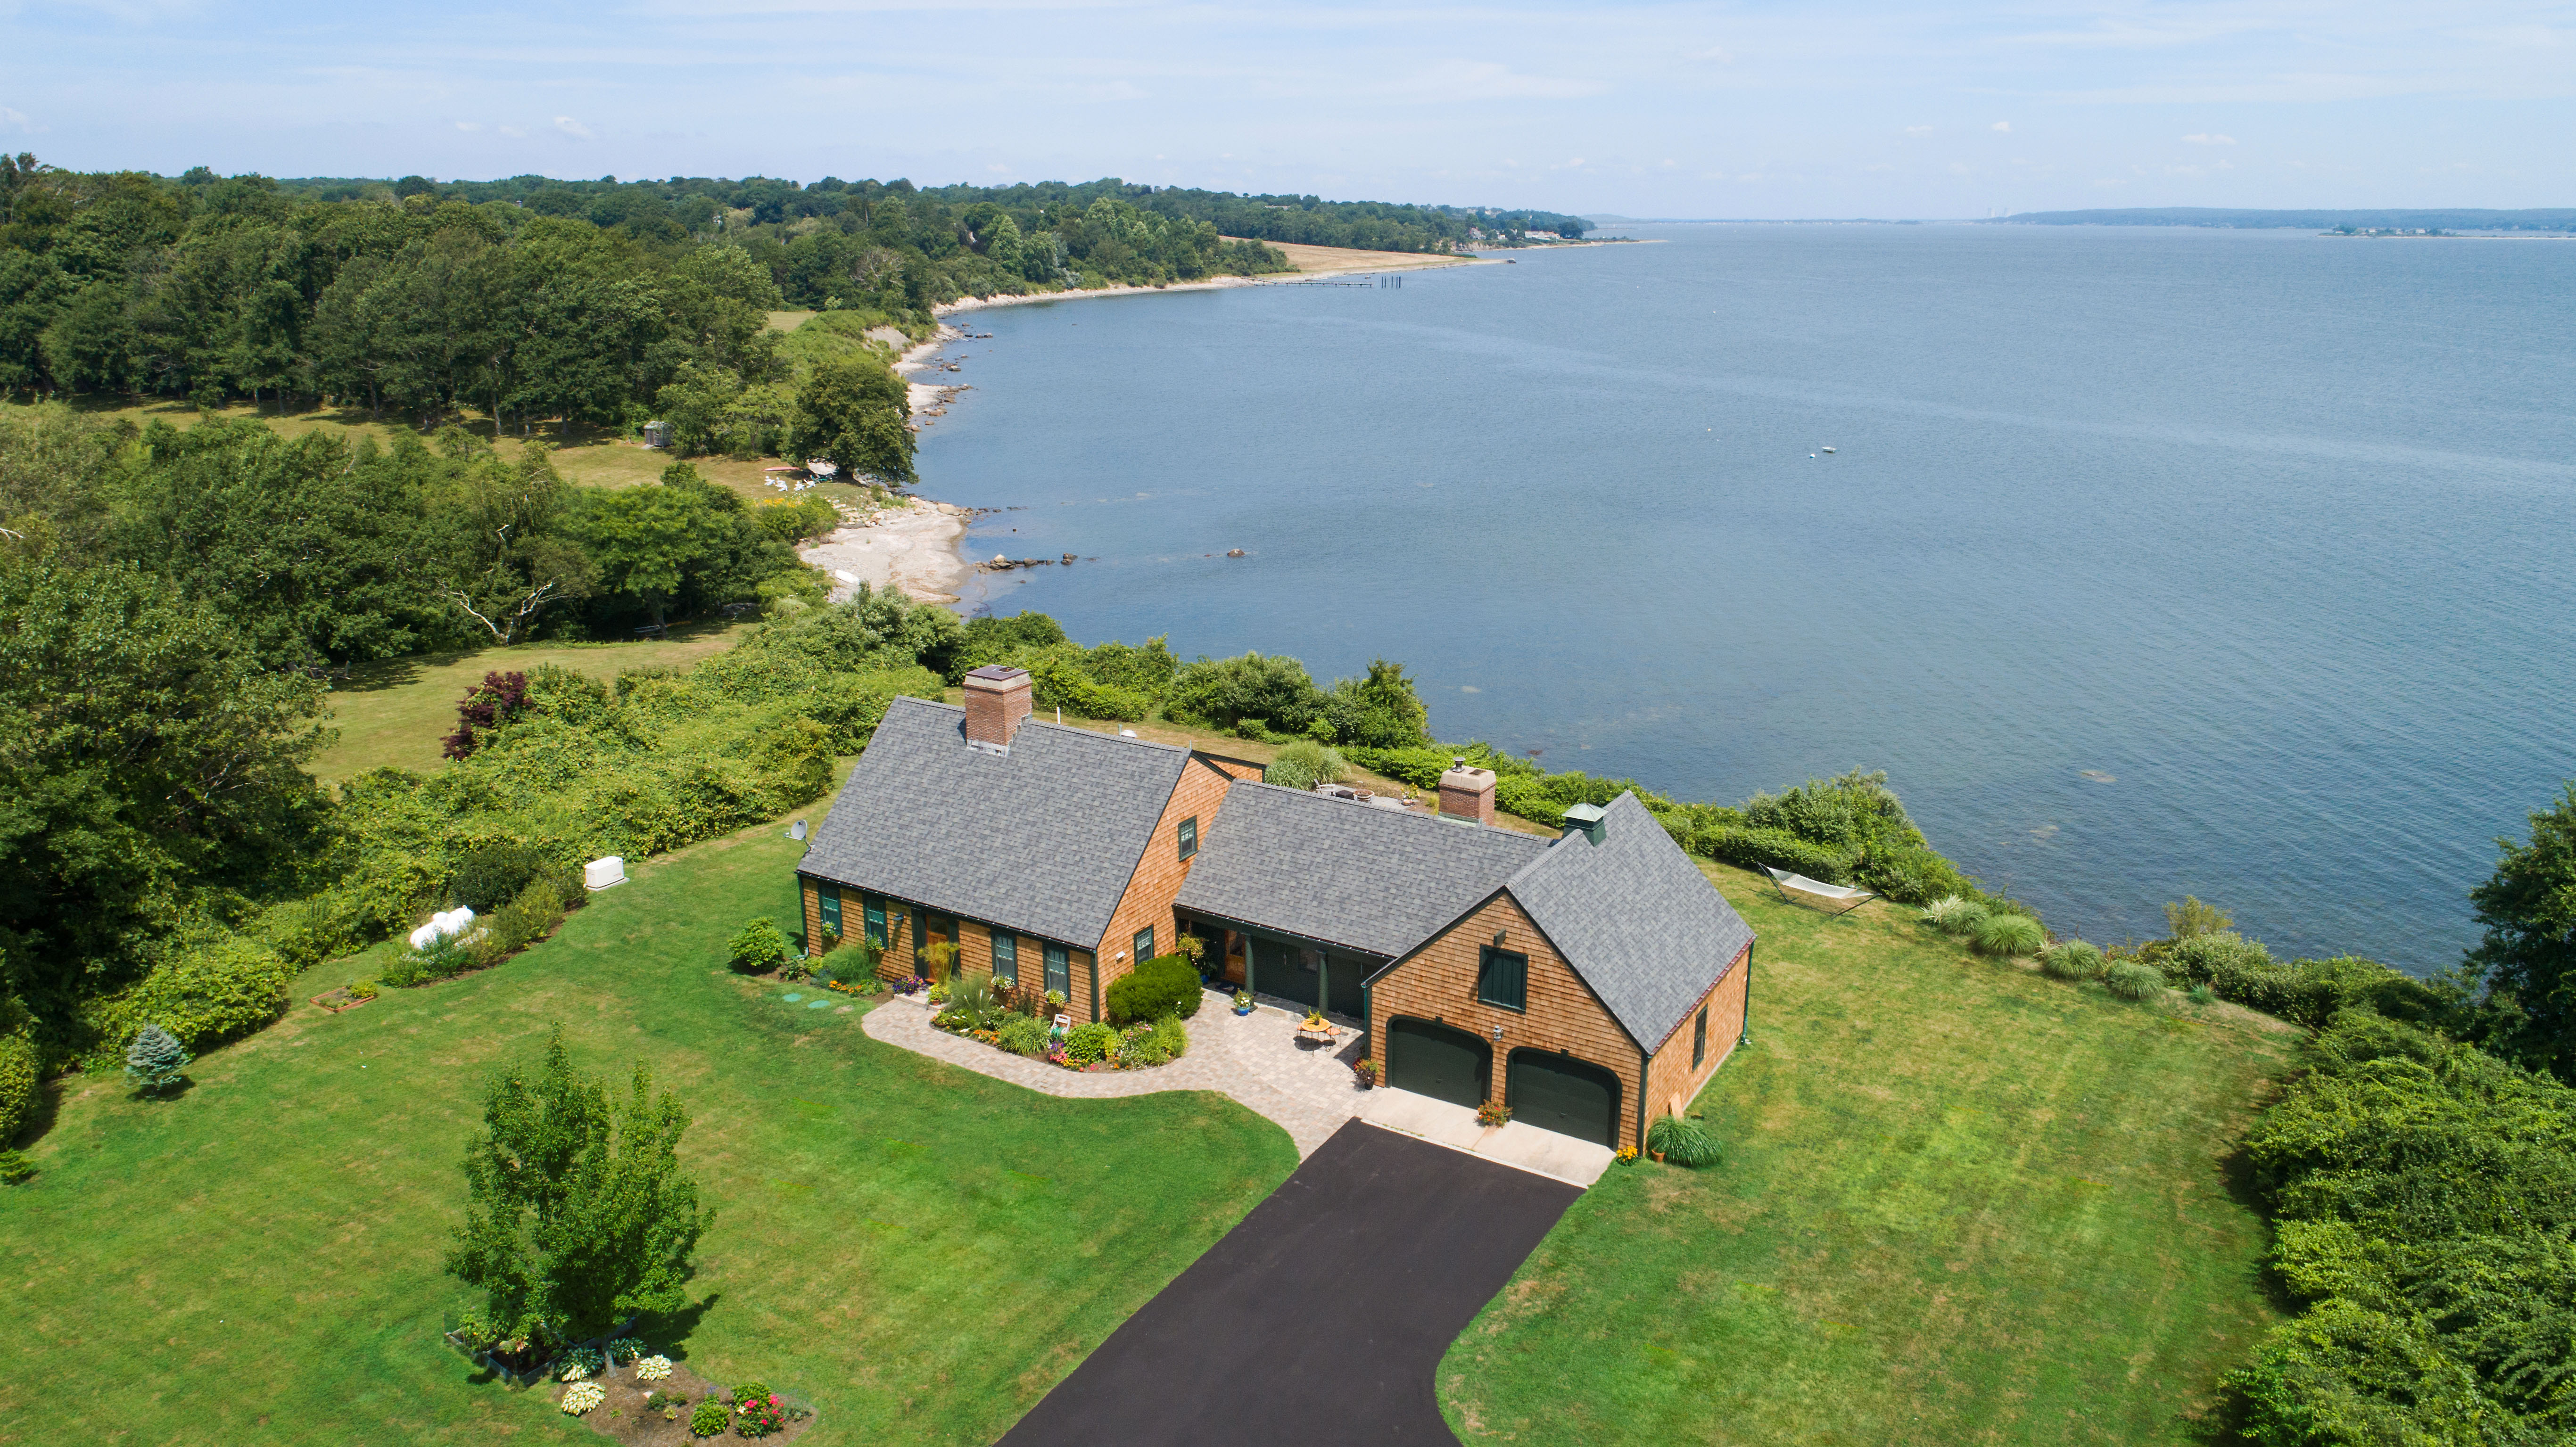 BLACK POINT WATERFRONT HOME SELLS FOR $1.745M,  MARKING A TOP SALE IN PORTSMOUTH*